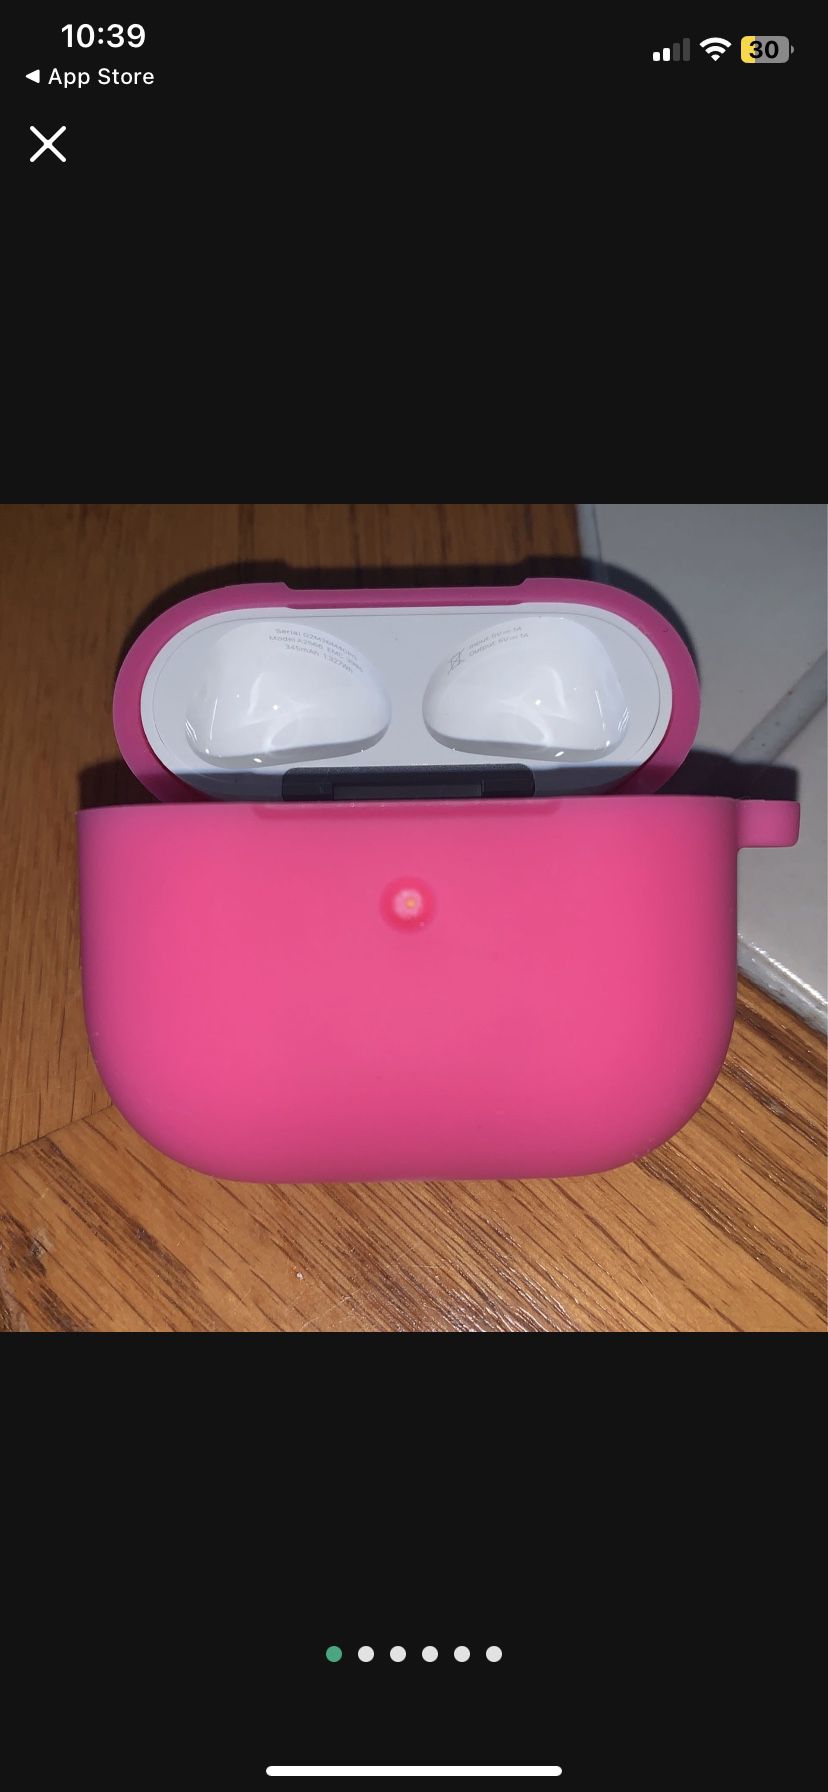 Apple AirPods Pro replacement charging case with pink cover case